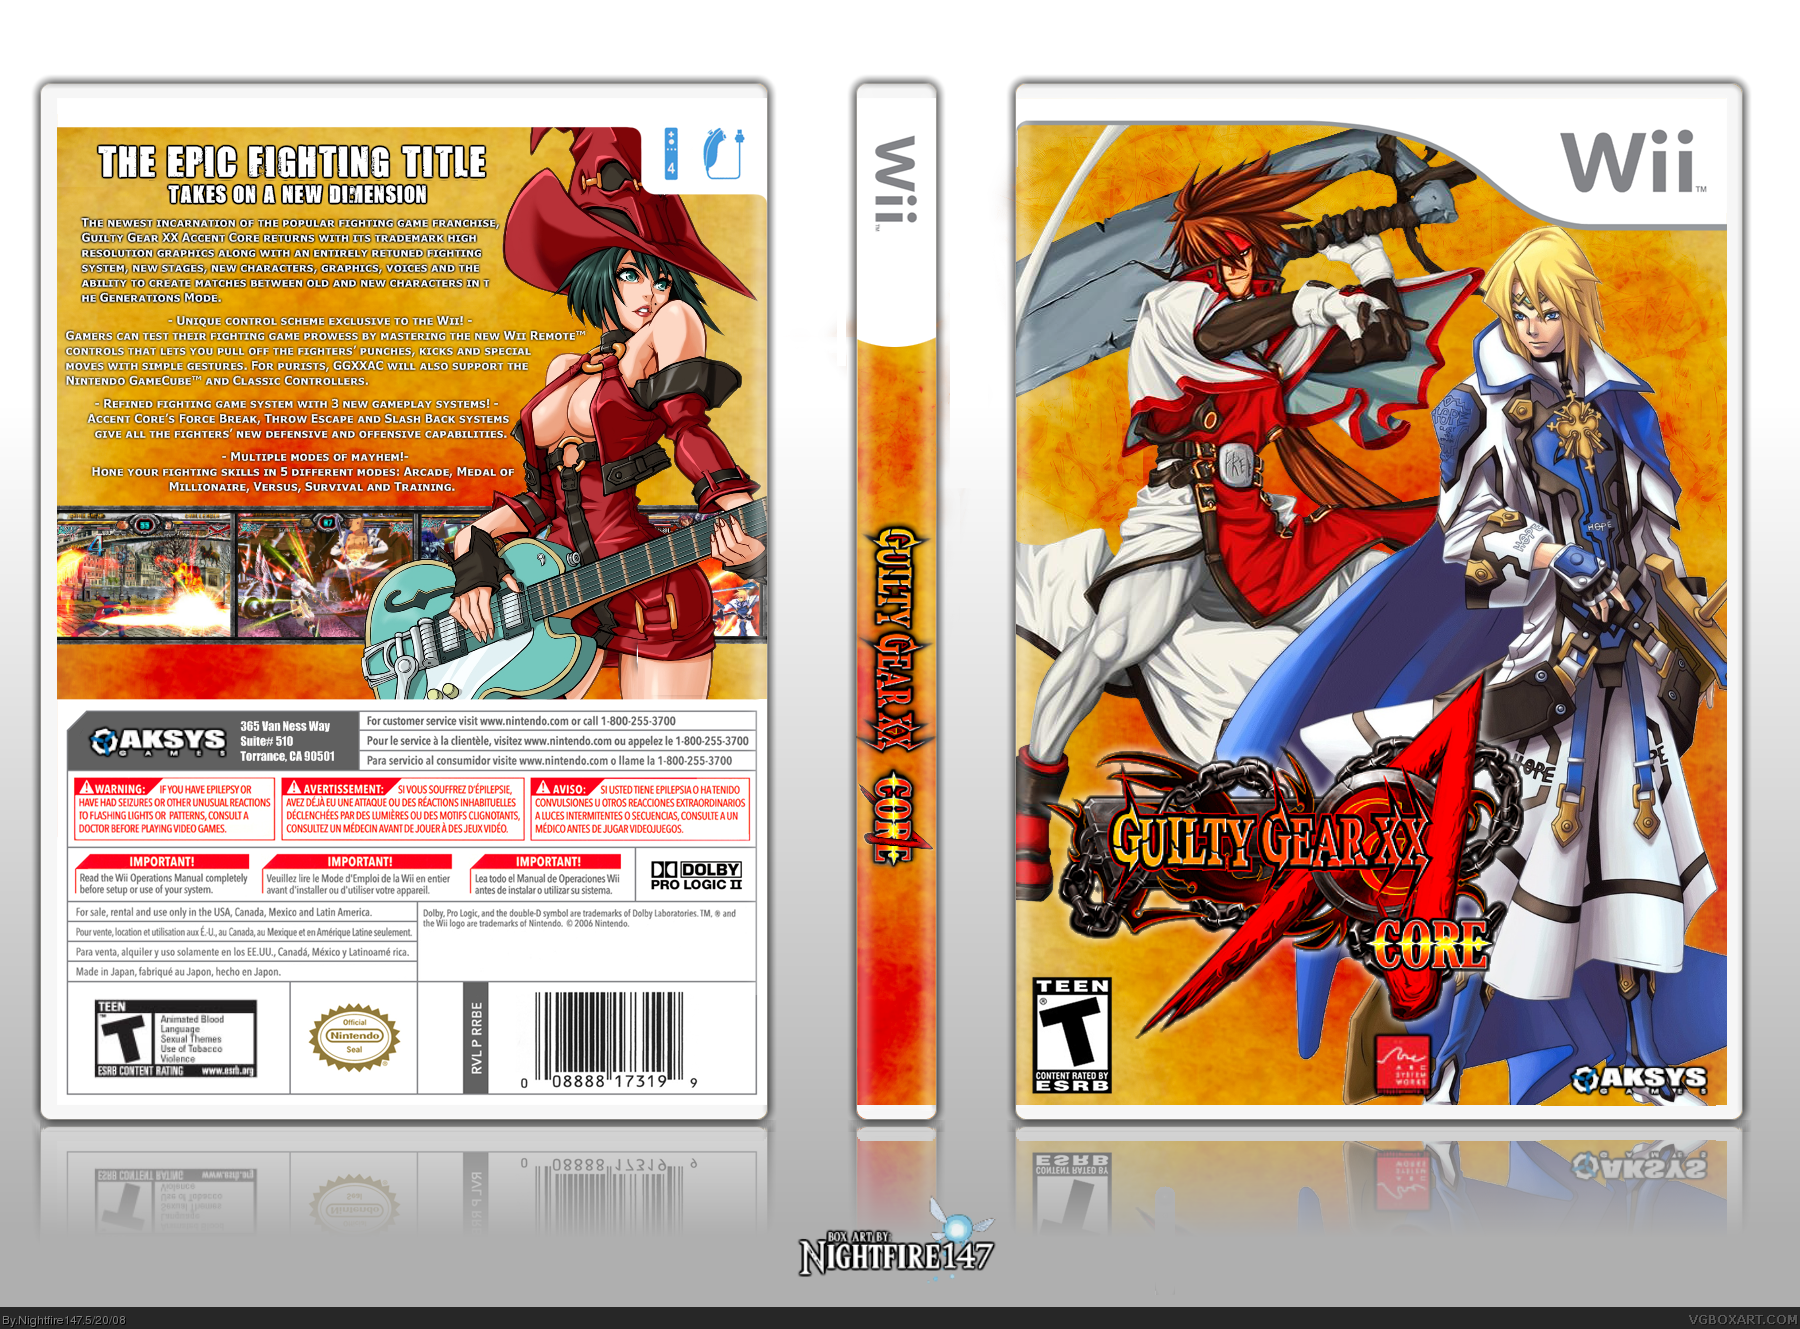 Guilty Gear XX: Accent Core box cover